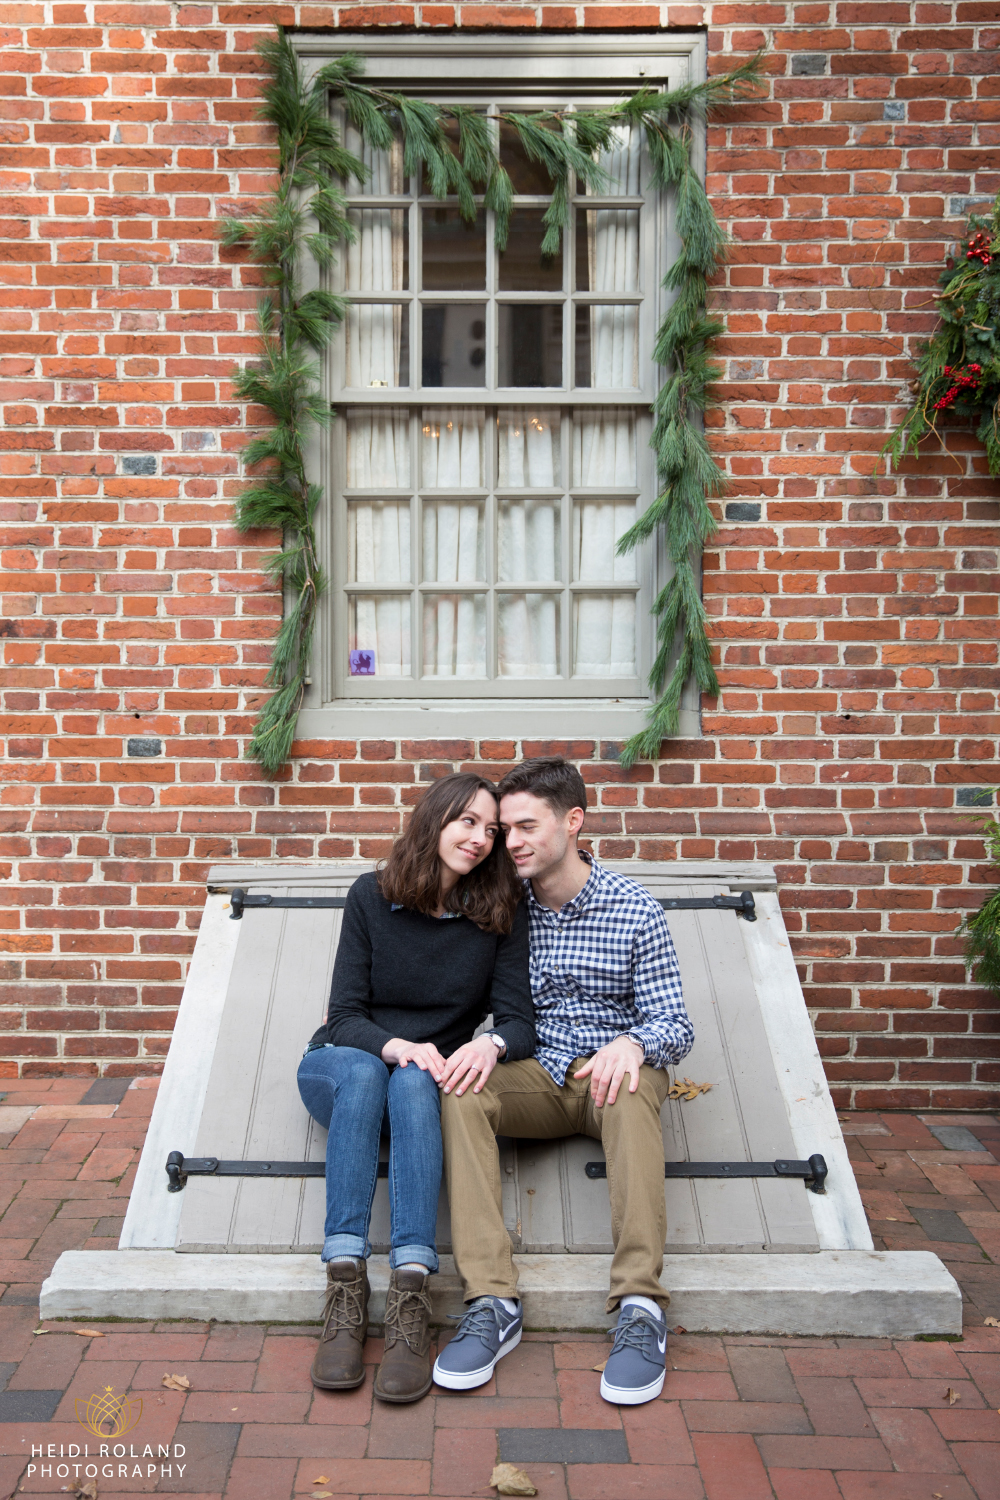 Winter Engagement session with garland 